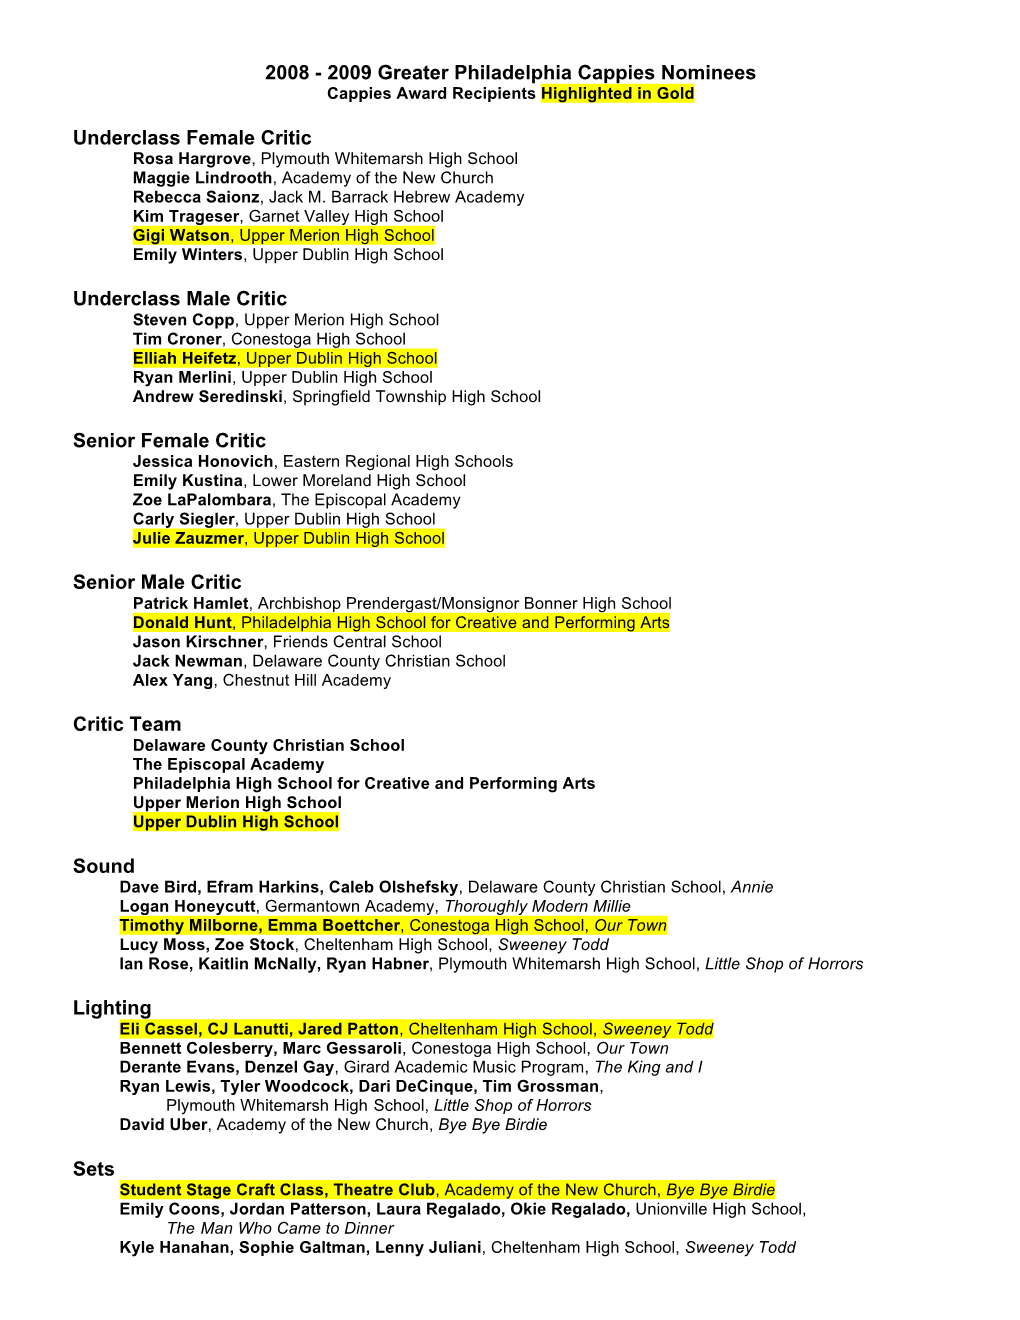 2008 - 2009 Greater Philadelphia Cappies Nominees Cappies Award Recipients Highlighted in Gold